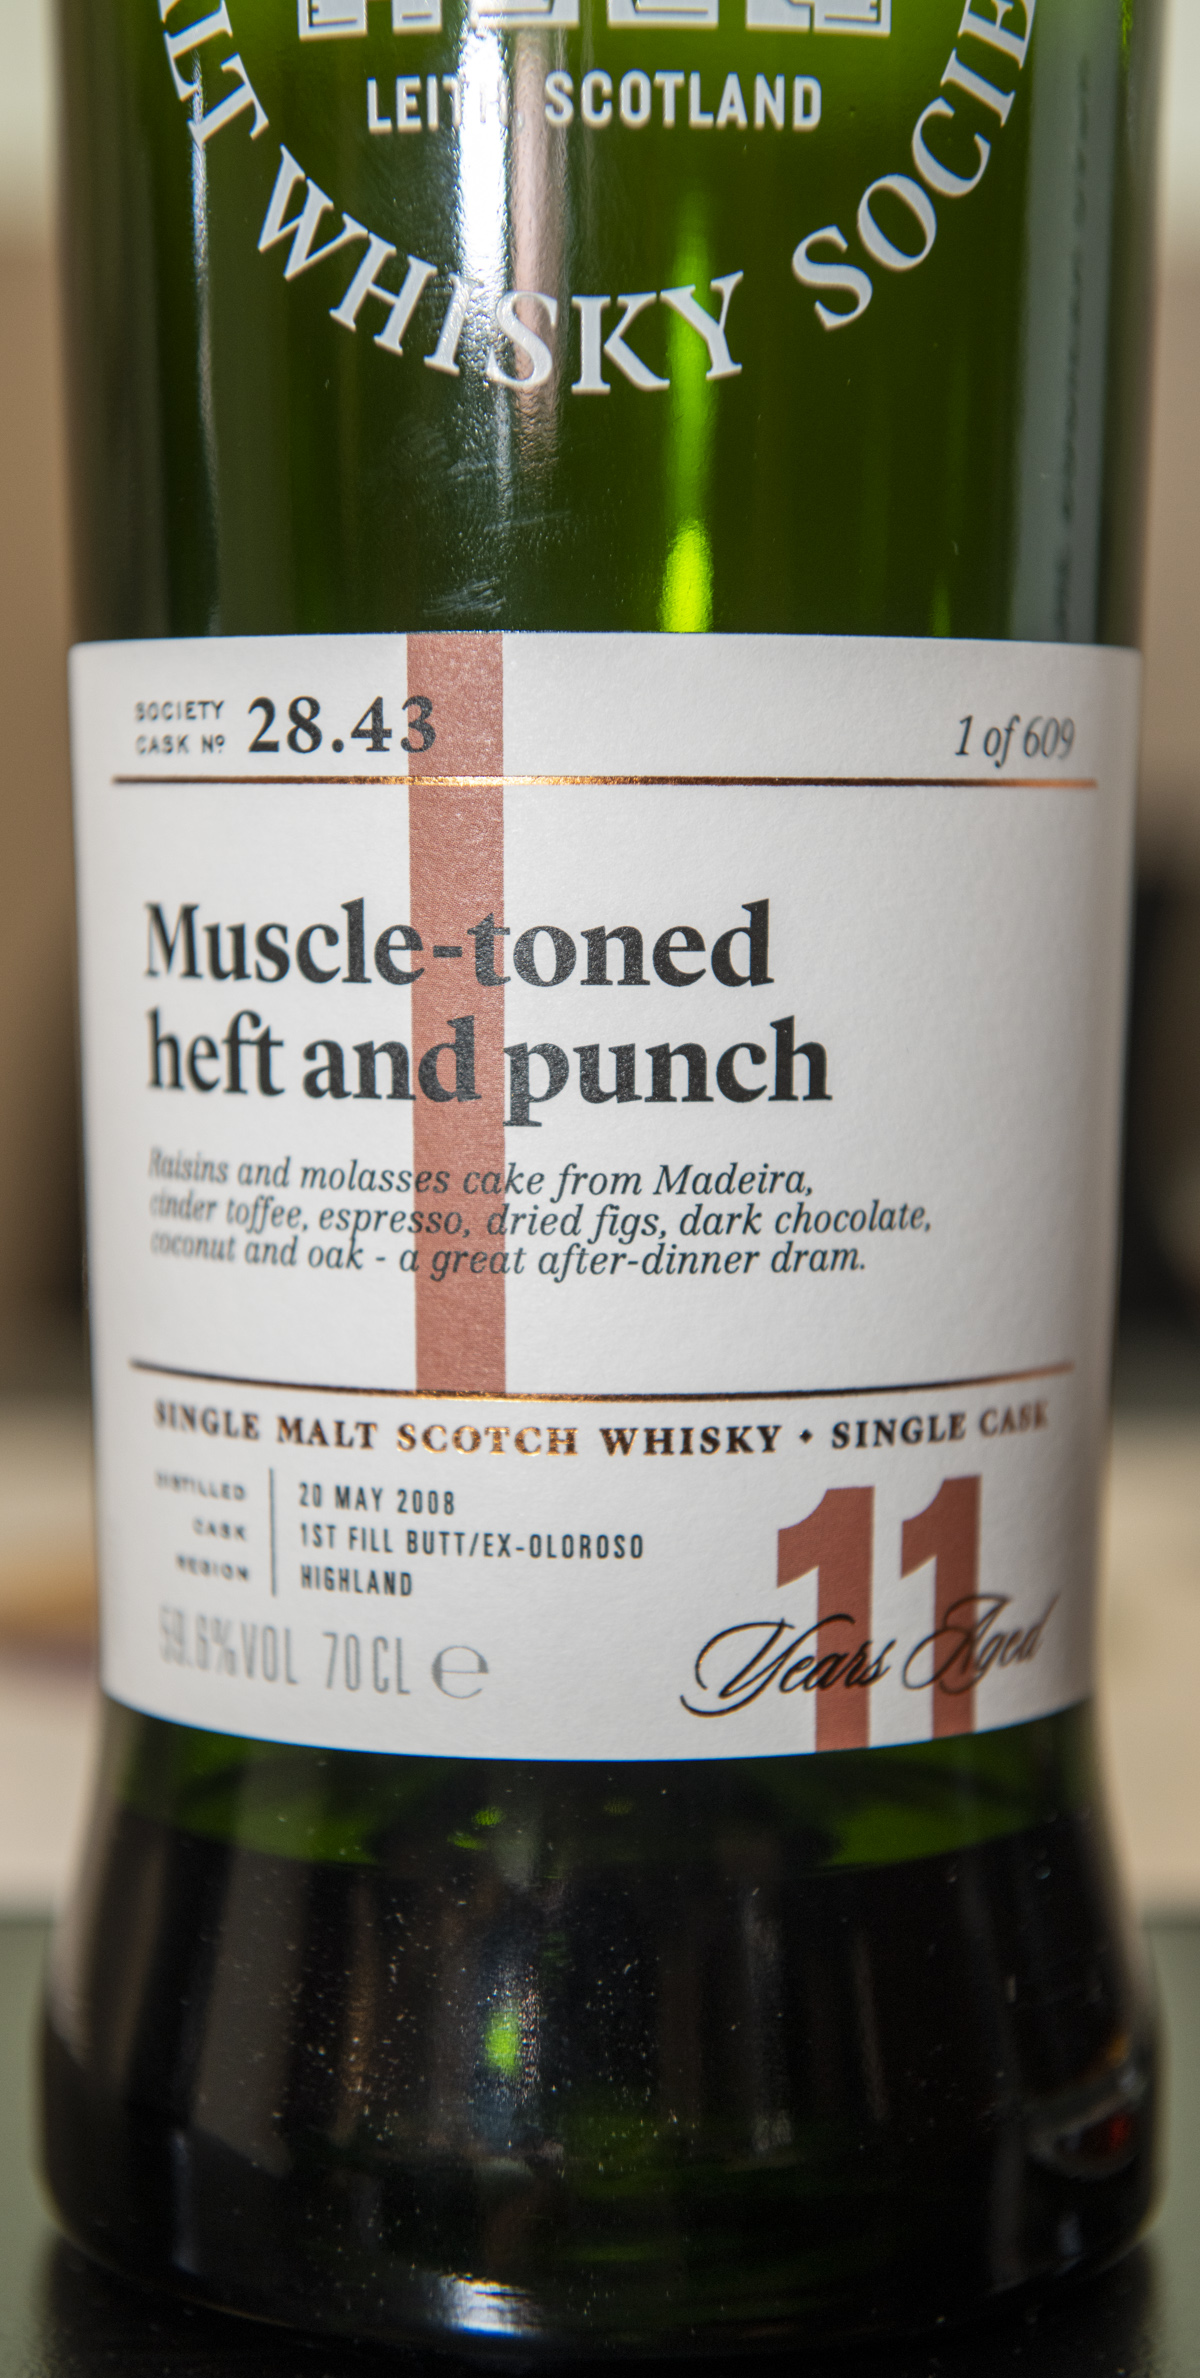 Billede: PHC_2939 - SMWS 28.43 Muscle-toned heft and punch.jpg